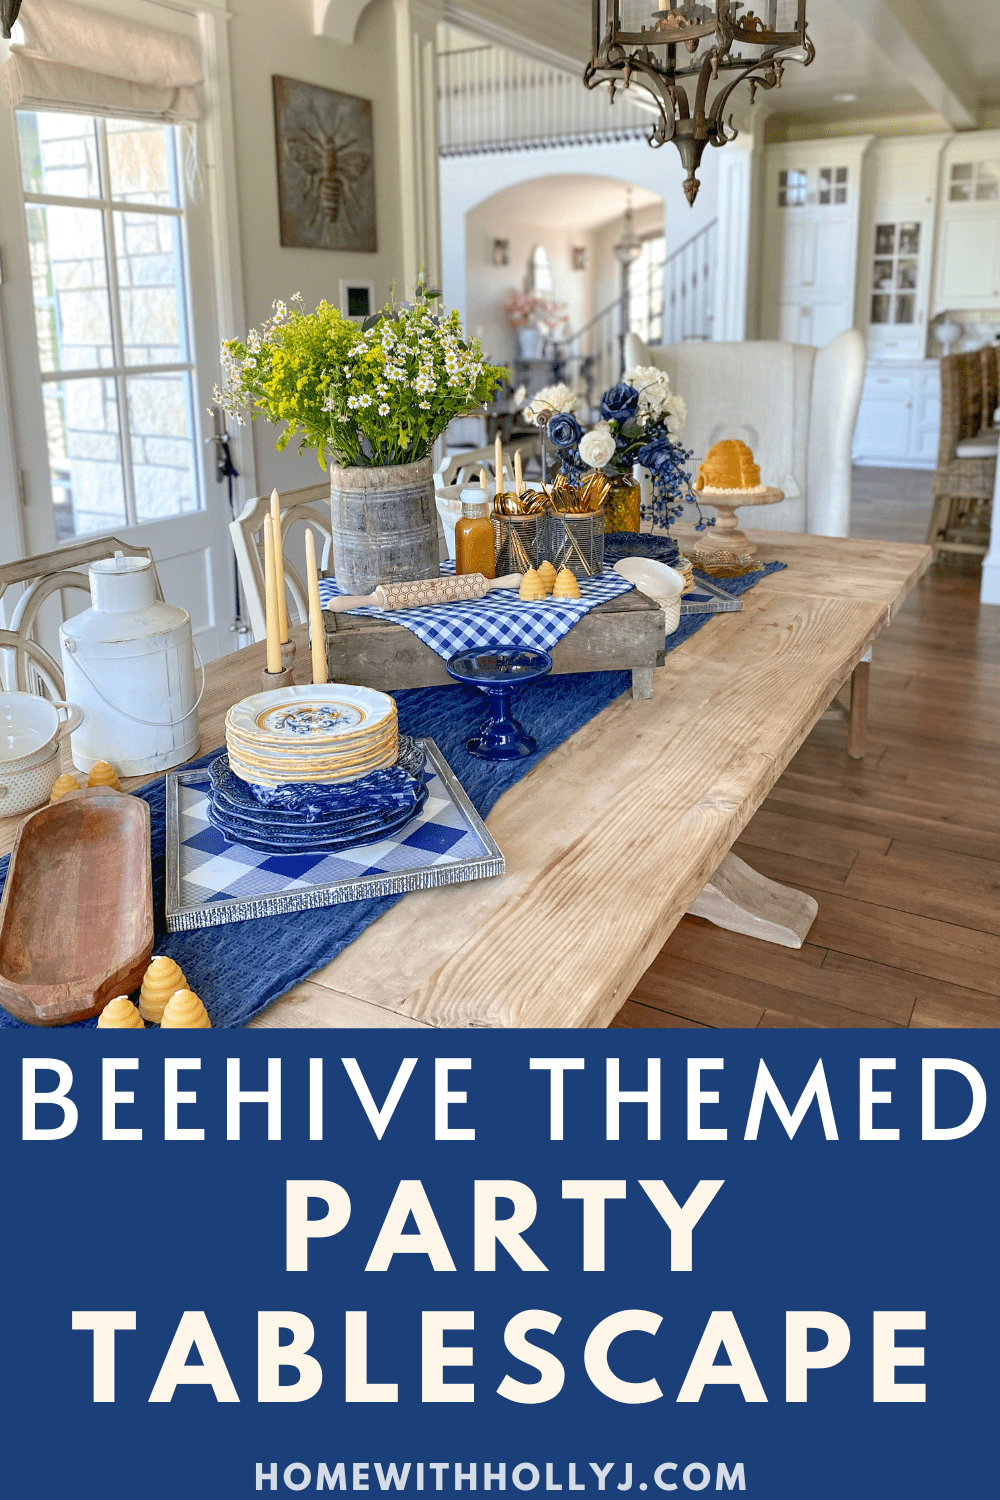 Since Utah is the Beehive State, today I am sharing my bee themed party tablescape inspiration featuring all things beehive!